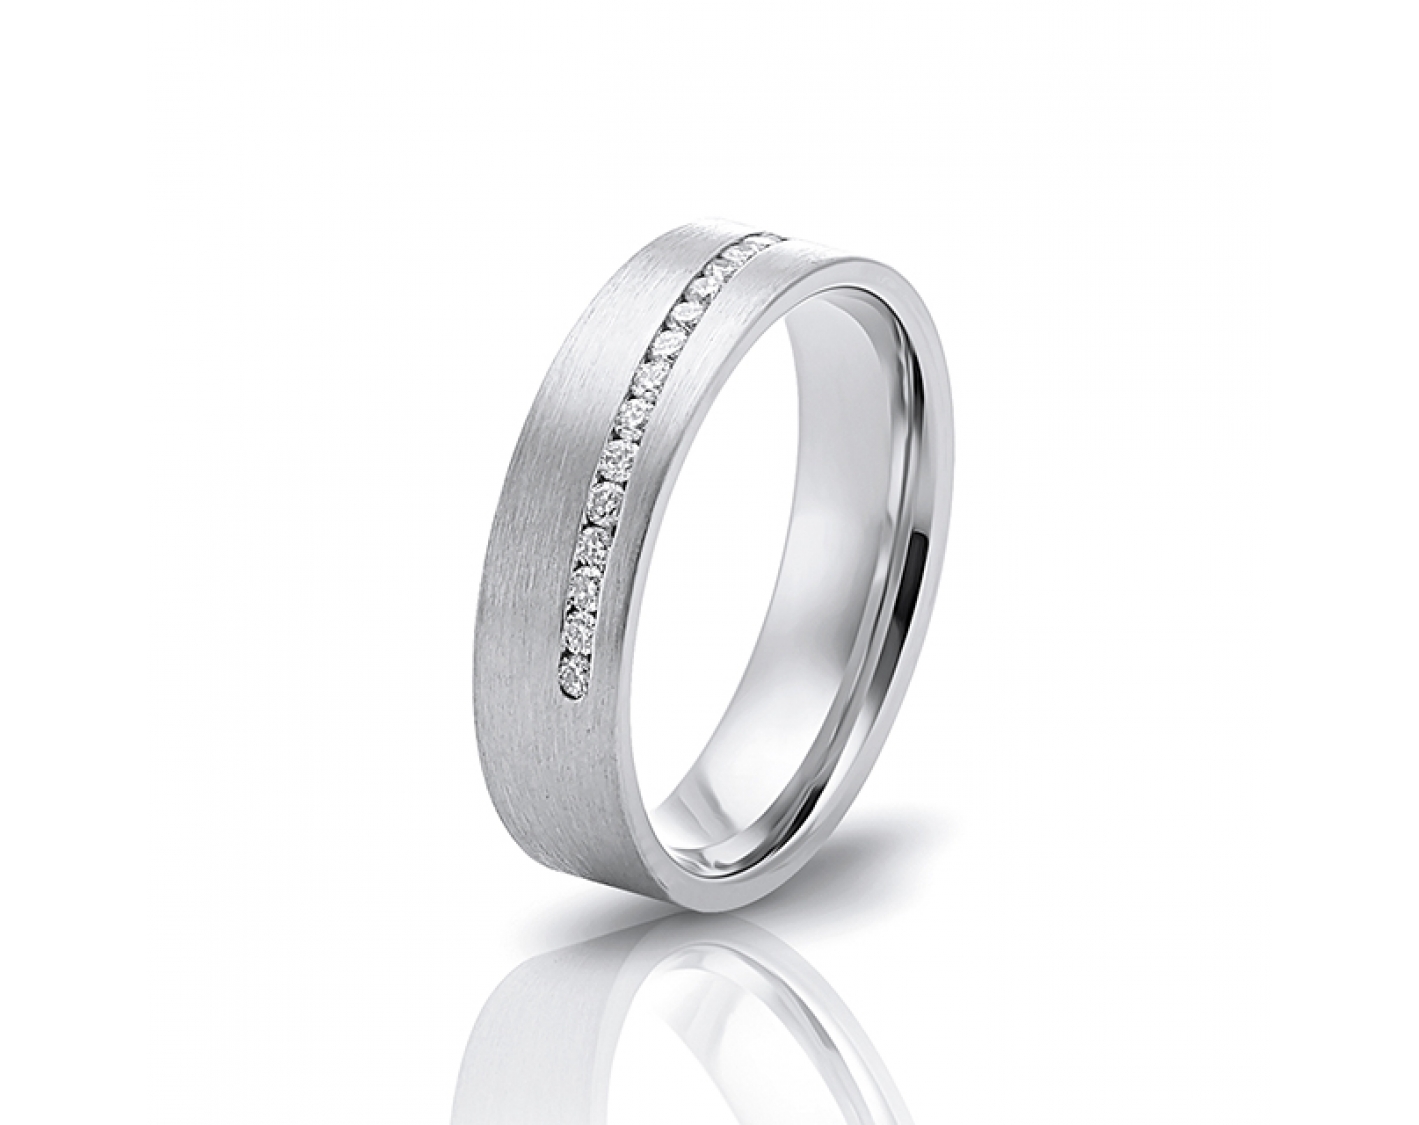 18k white gold 5mm matte wedding band with a diamond line